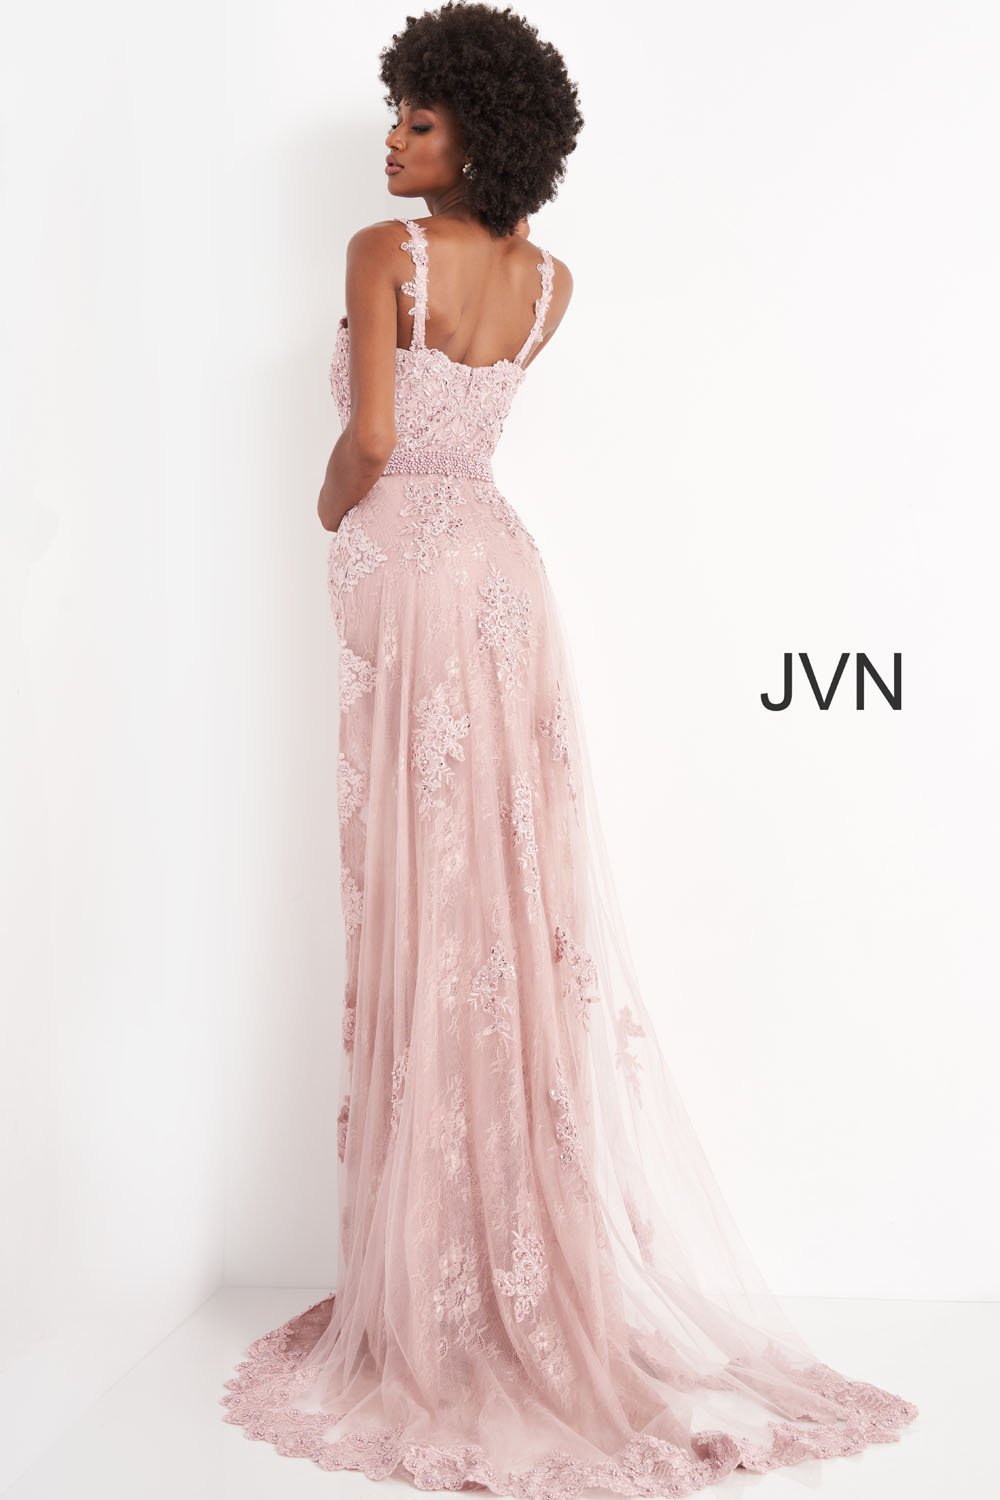 Jovani JVN2444 dress images in these colors: Dusty Rose.